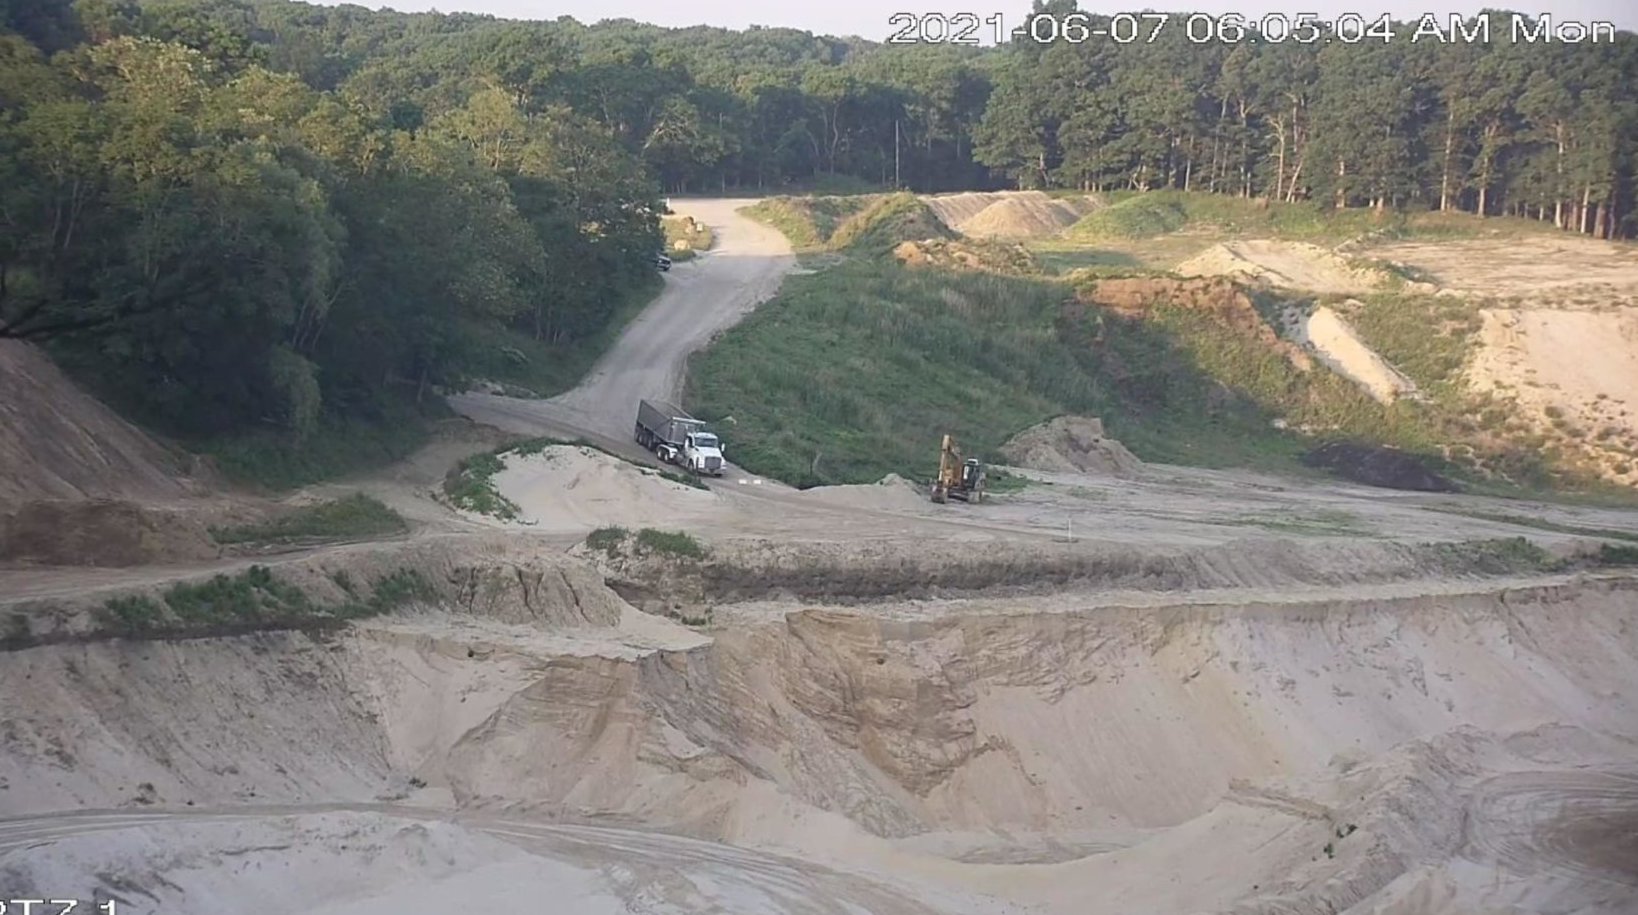 Surveillance camera footage of crews operating at the Sand Land mine in Noyac on June 7. (Courtesy of Noyac Civic Council)